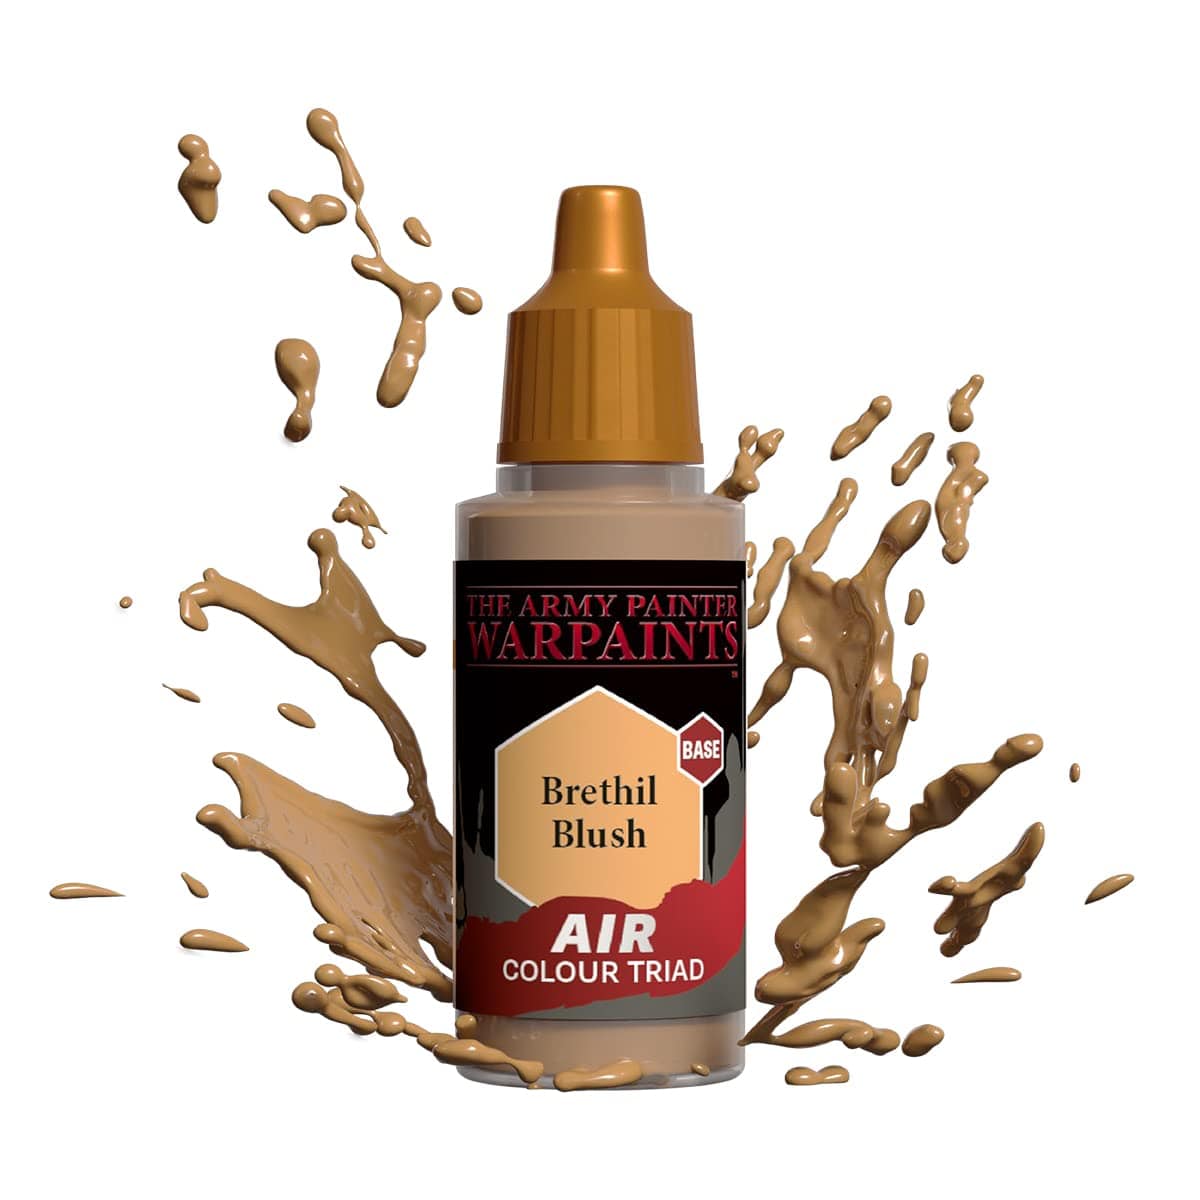 The Army Painter Accessories The Army Painter Warpaints Air: Brethil Blush 18ml